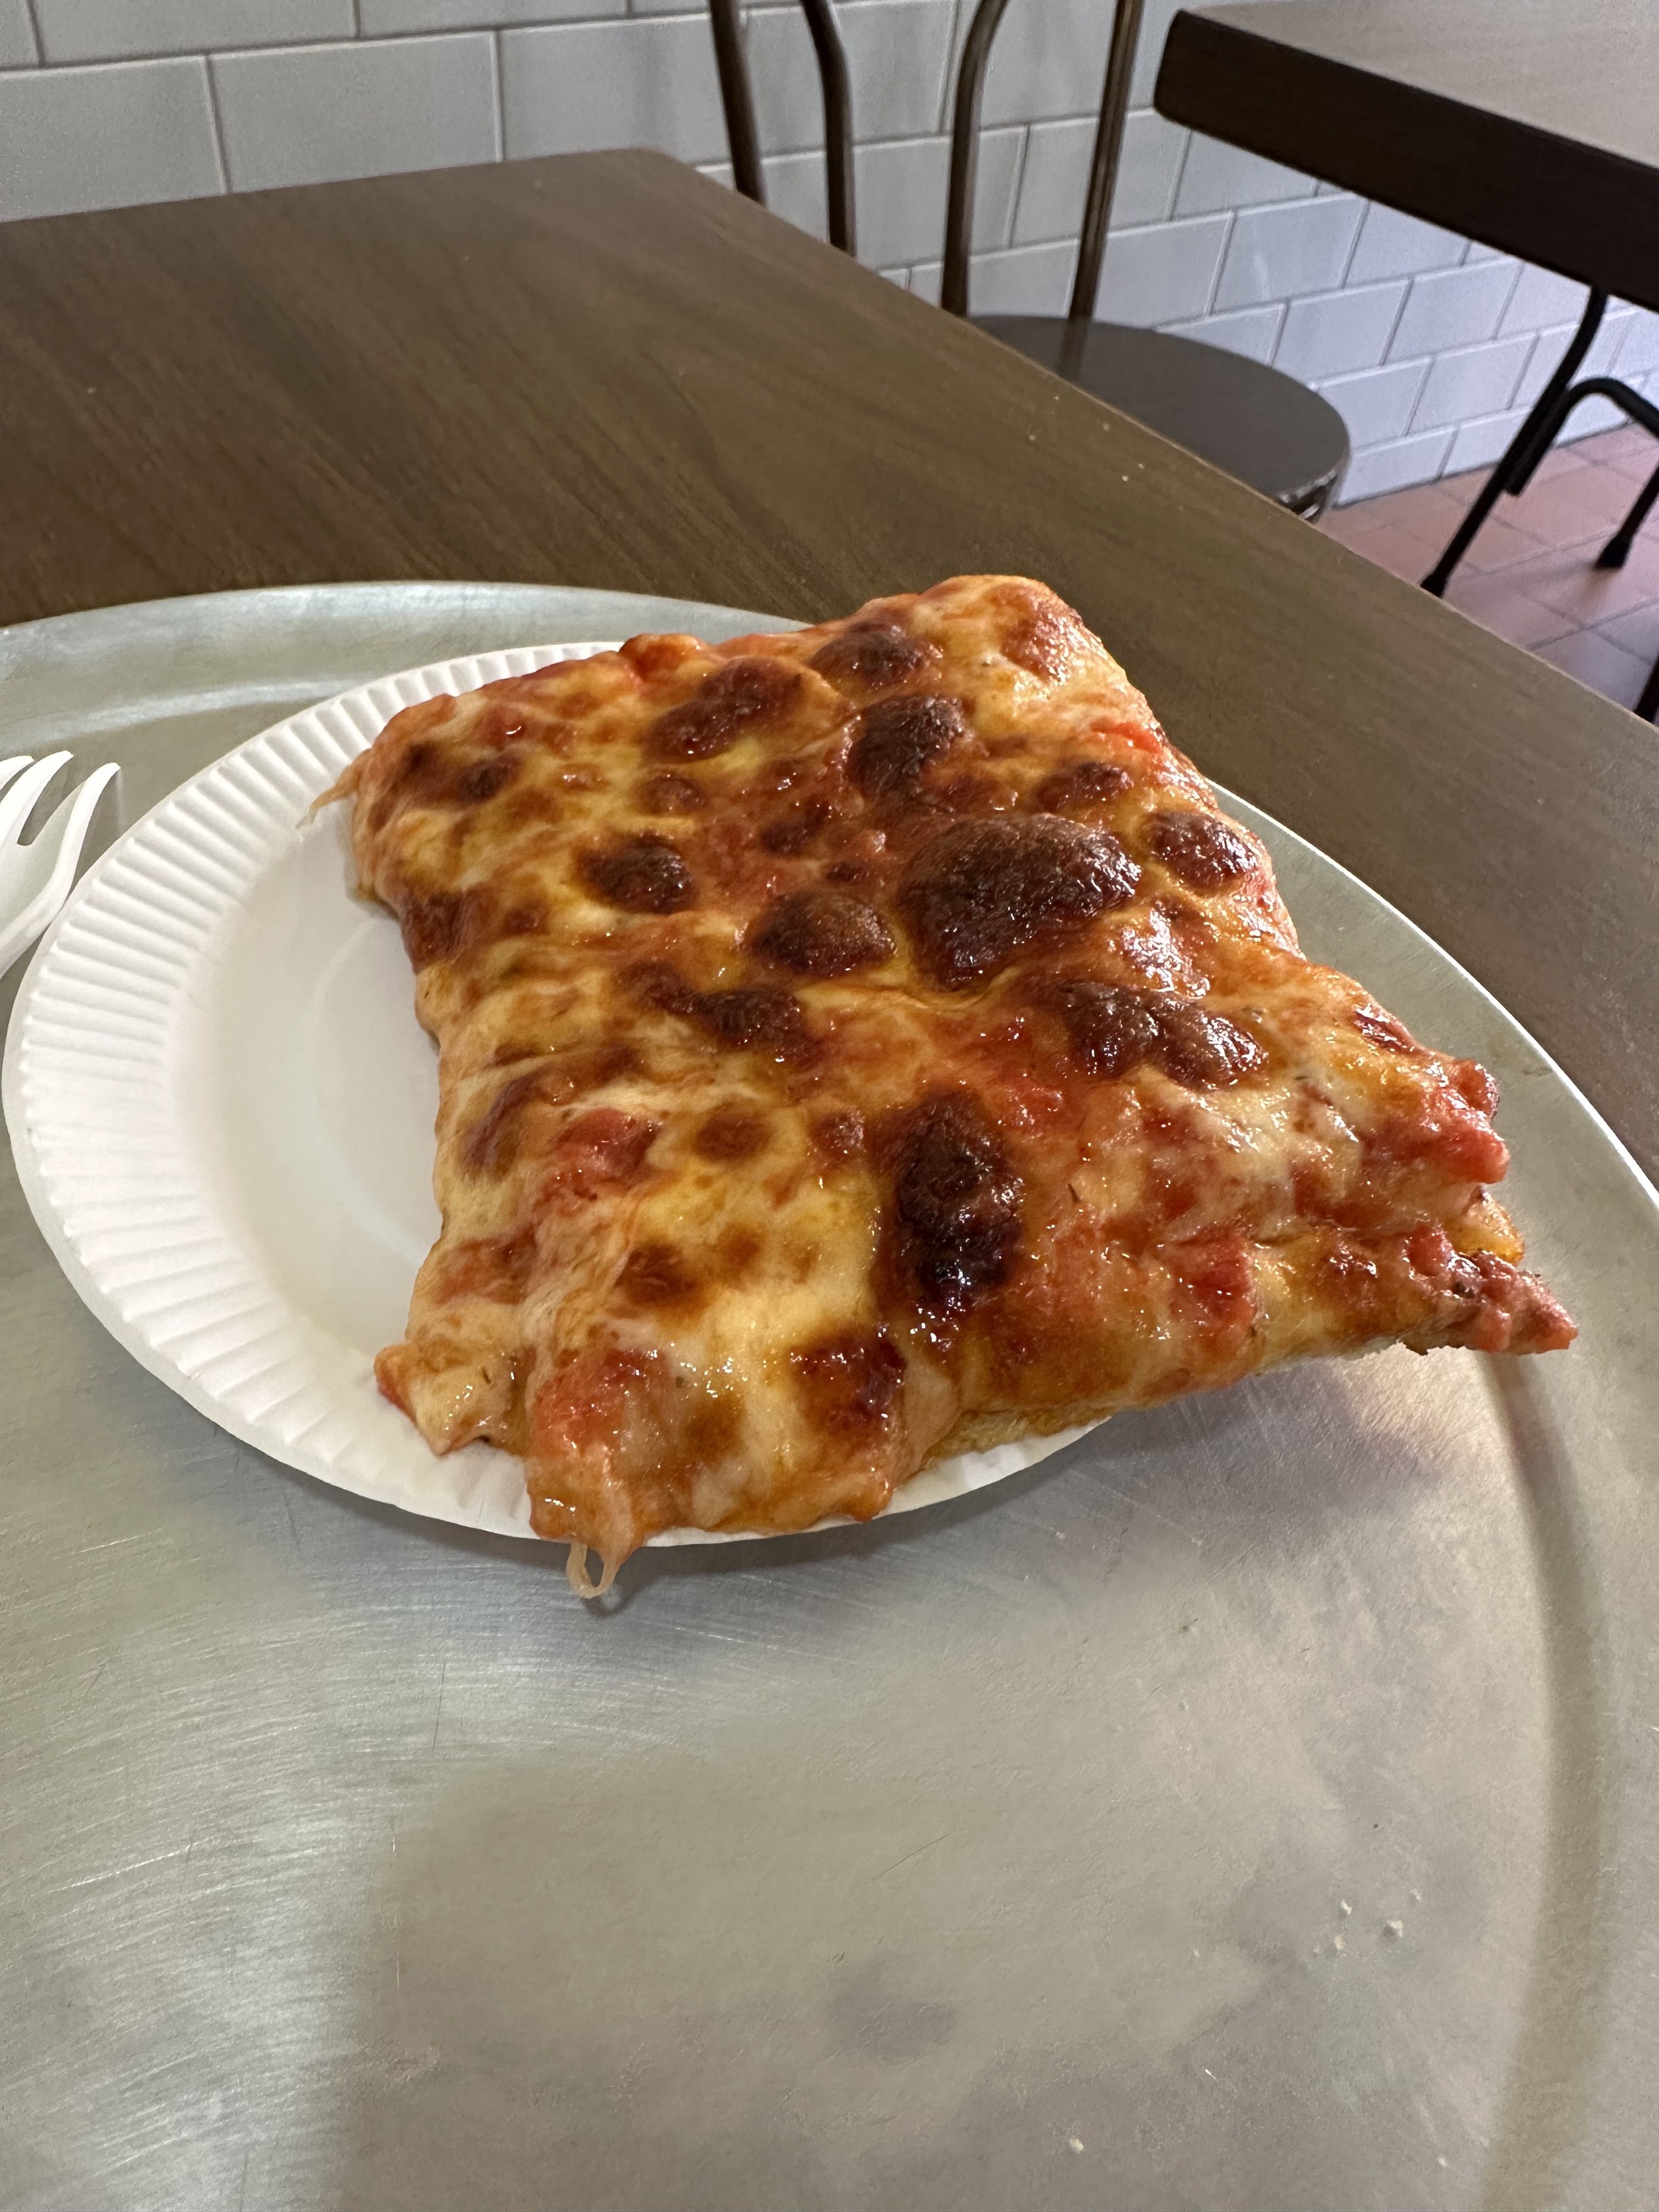 A Sicilian slice from Galleria Umberto in the North End